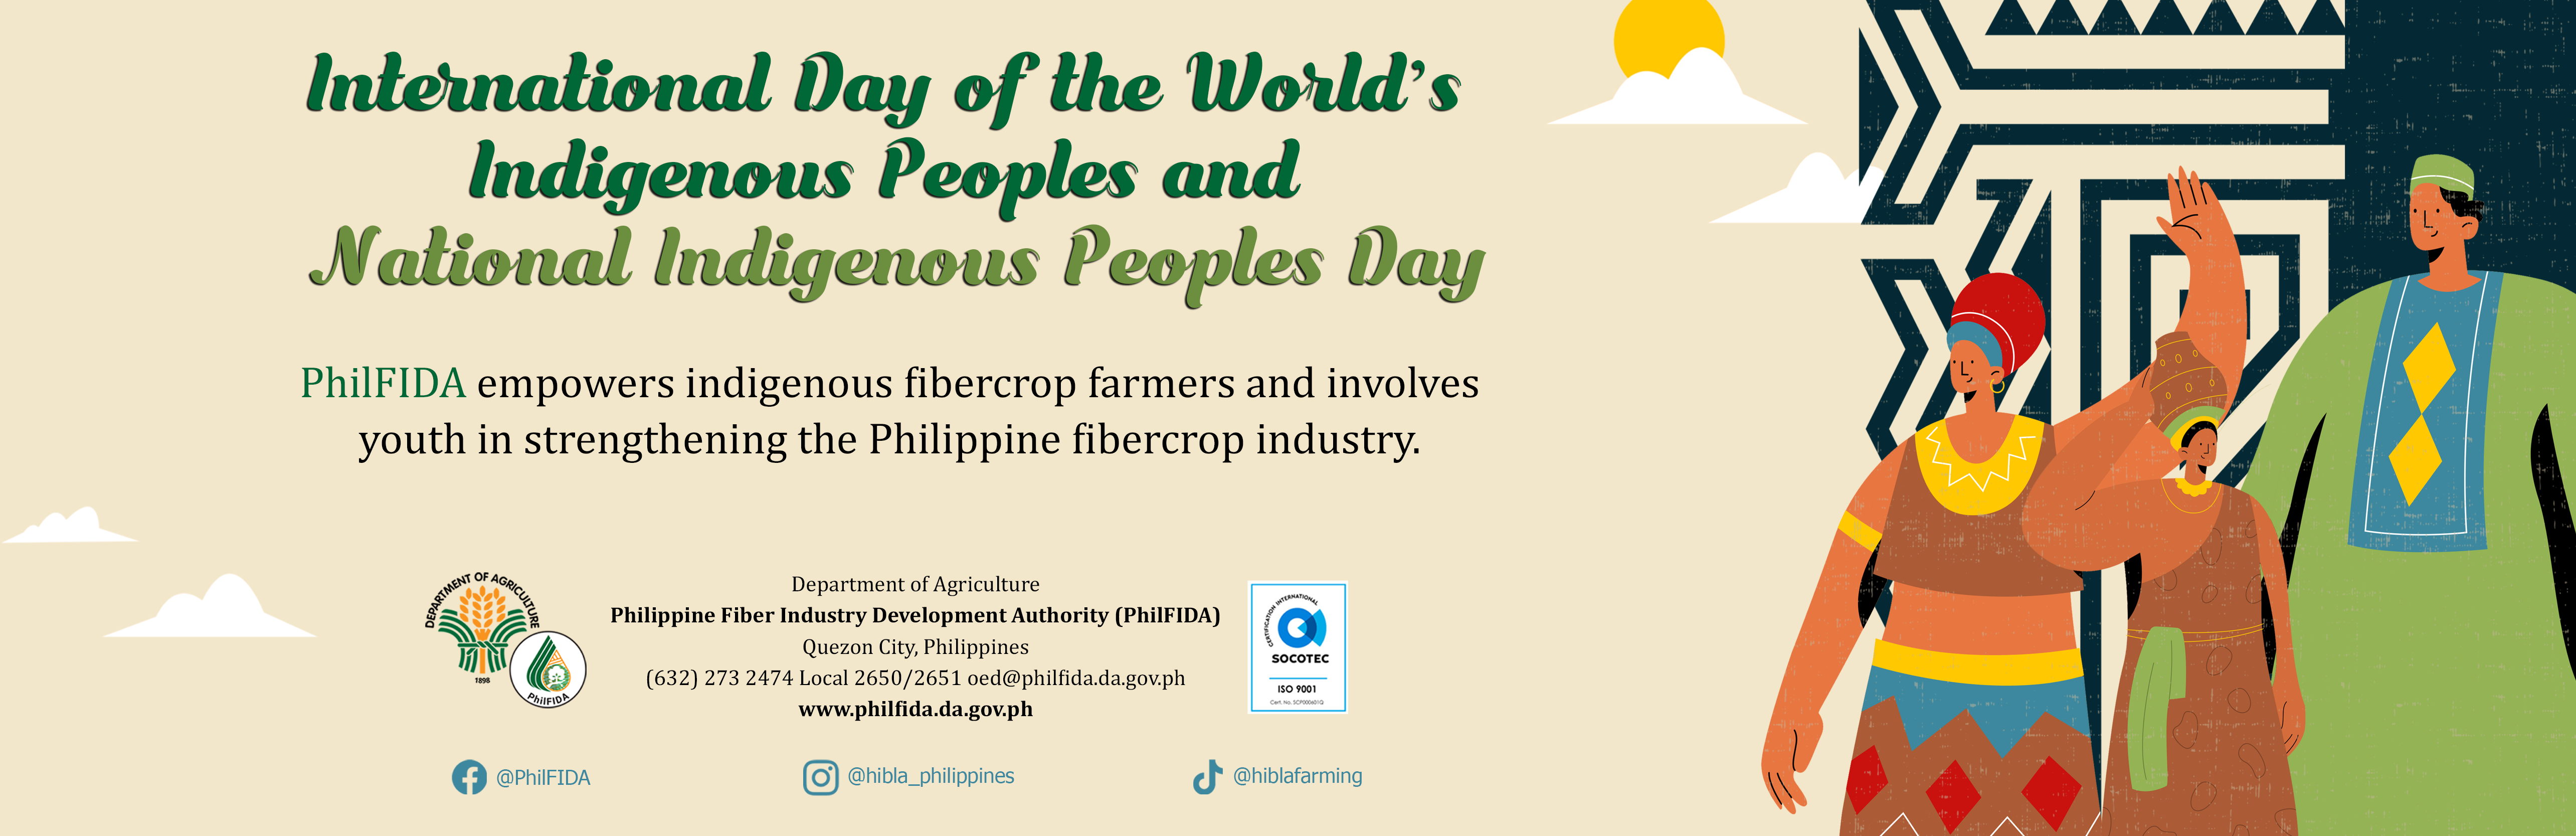 International Day of the World's Indigenous Peoples and National Indigenous Peoples Day